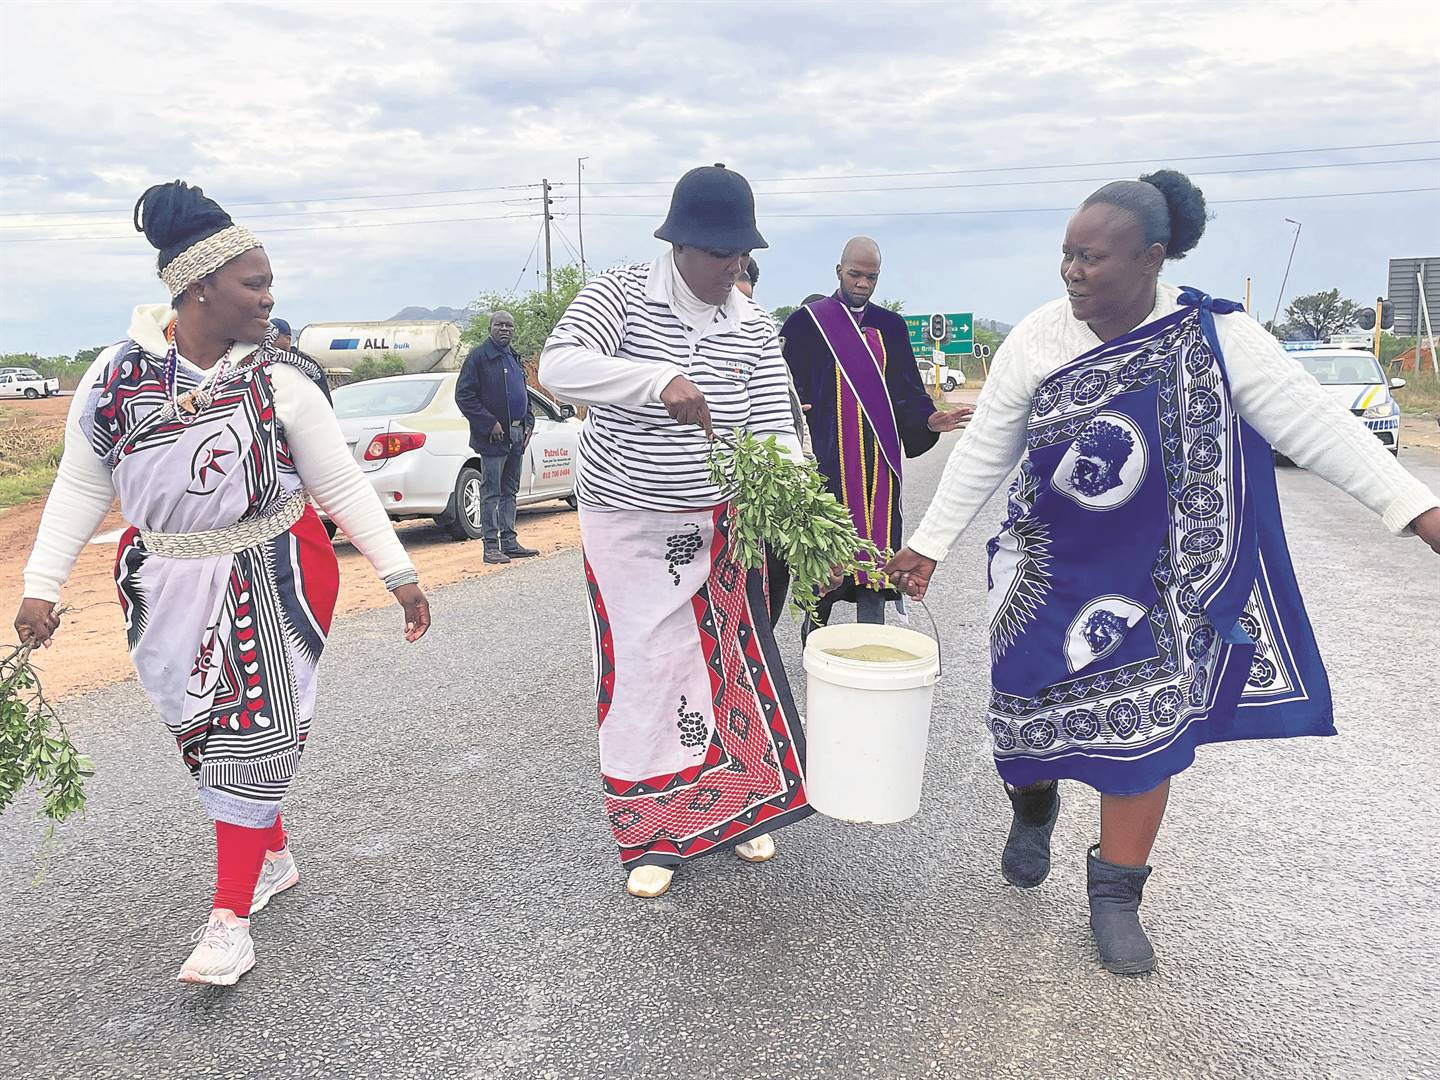 Traditional healers, pastors and other stakeholders from Ga-Rankuwa and surrounding areas gathered on the Hornsnek Road in Tshwane to remove lingering spirits after a number of people died in horrific accidents in the area.                                        Photo by Kgalalelo Tlhoaele